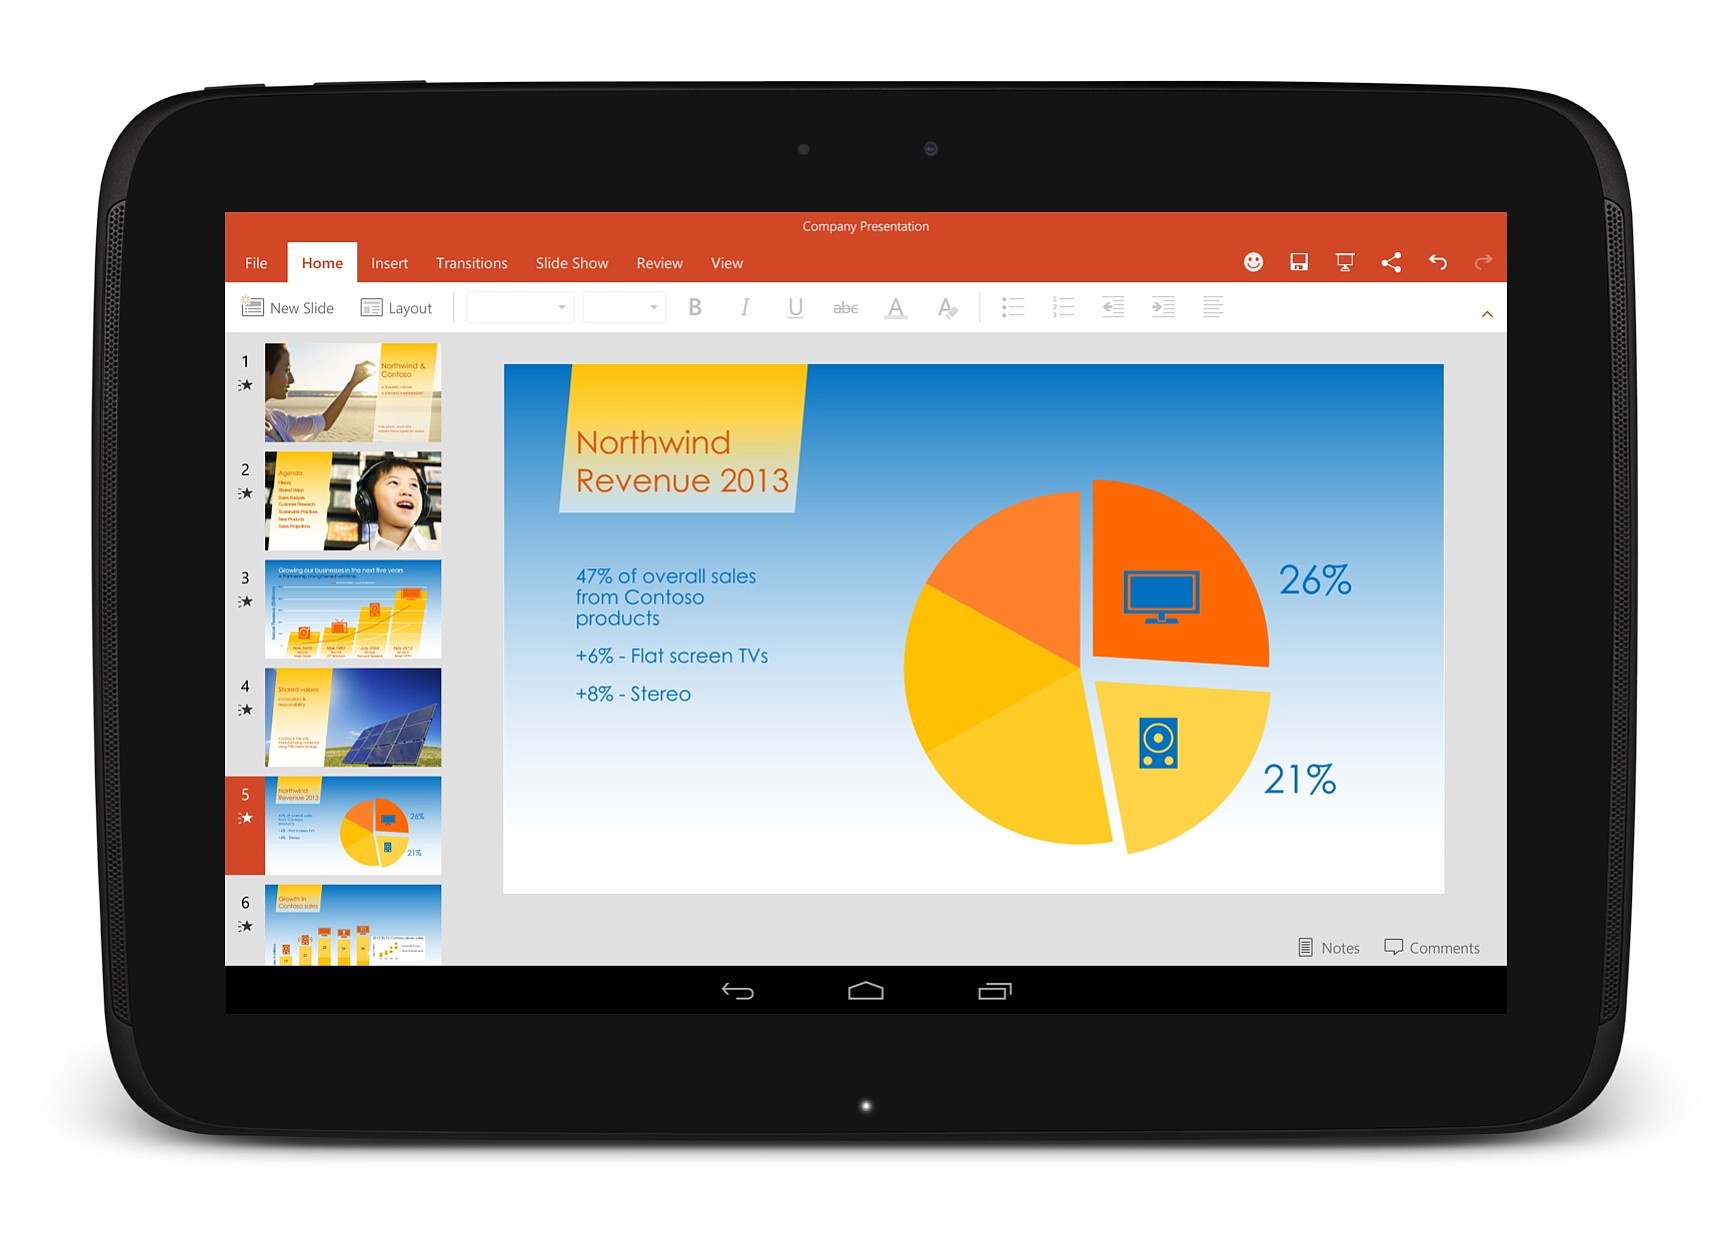 Microsoft
The Android version of Microsoft's Powerpoint app. Microsoft's Office 365 subscription will appeal to people who use the Office programs, such as Word for text documents and Excel for spreadsheets, on a variety of traditional Windows or Mac computers or Windows tablets.